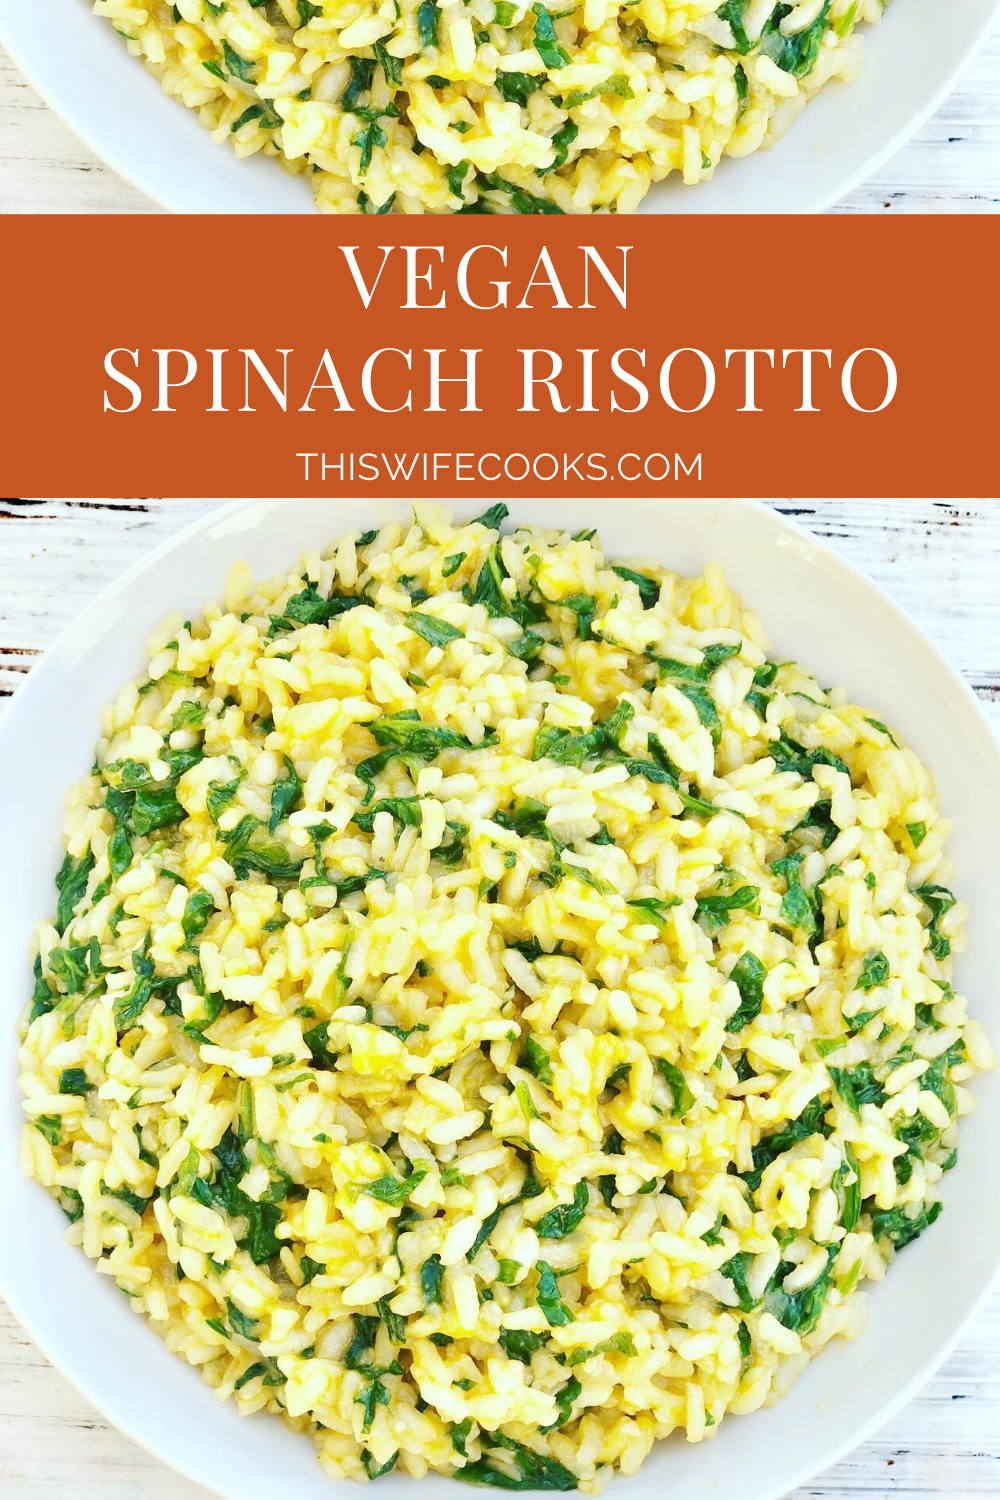 Vegan Spinach Risotto - A rich and creamy Italian comfort food meal made with fresh spinach, Arborio rice, and dairy-free feta cheese. via @thiswifecooks